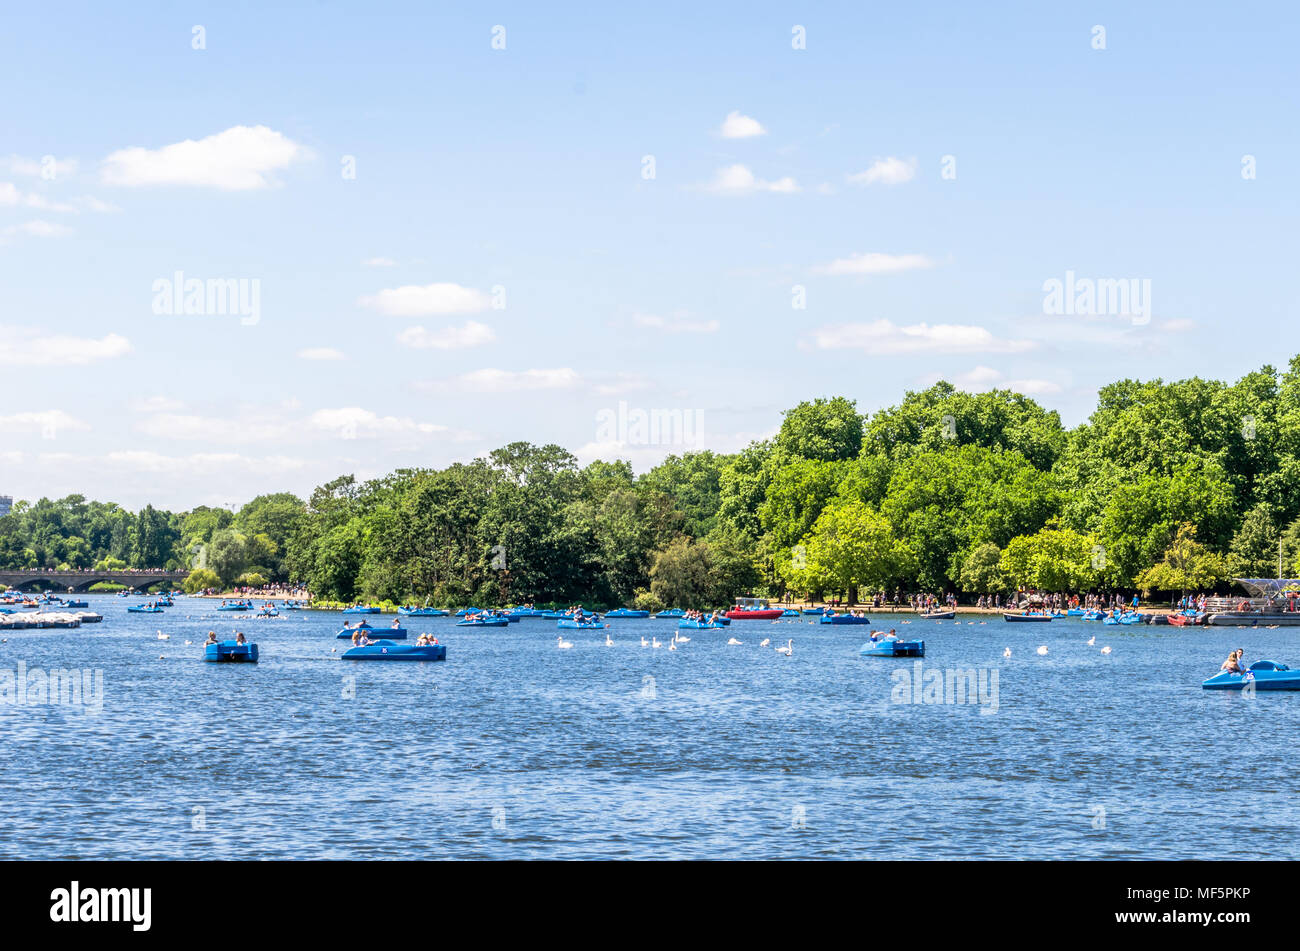 Tourists on recreational boats on the Serperntine at Hyde Park in the City of Westminster, London Stock Photo